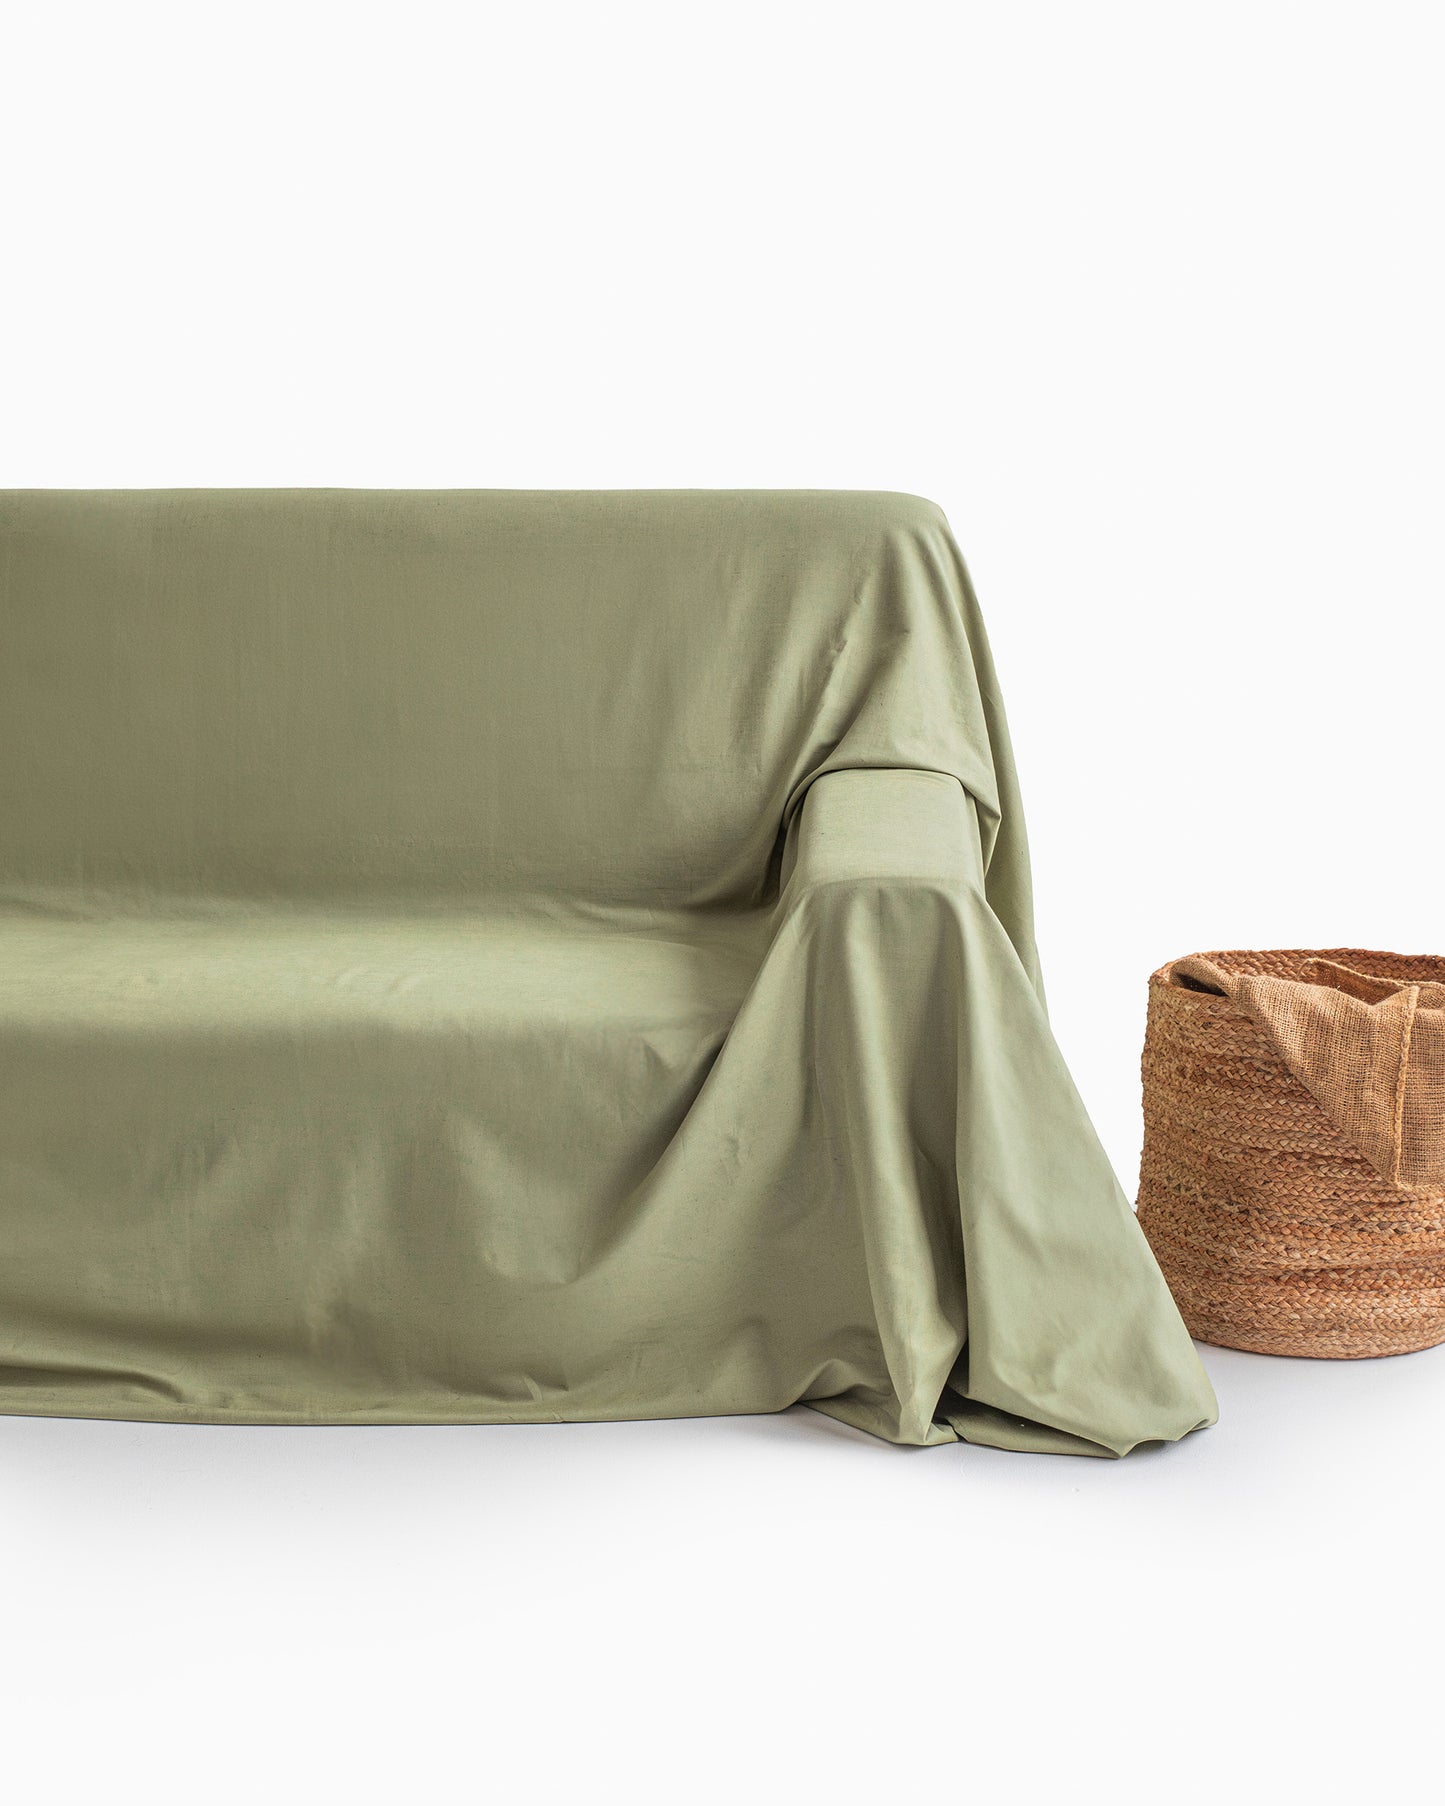 Couch cover in Sage - MagicLinen